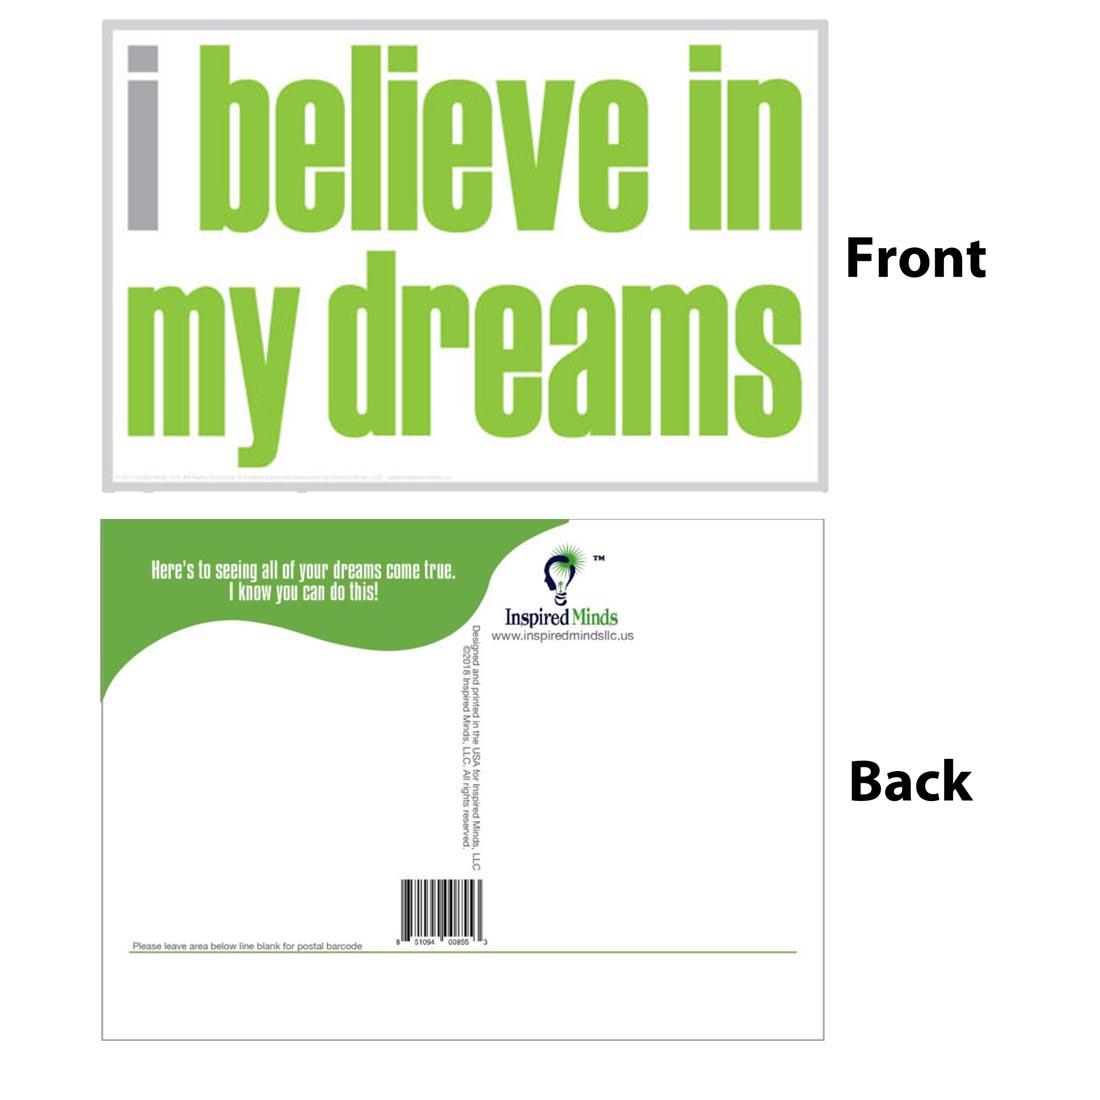 Front and back of the I Believe In My Dreams Postcard